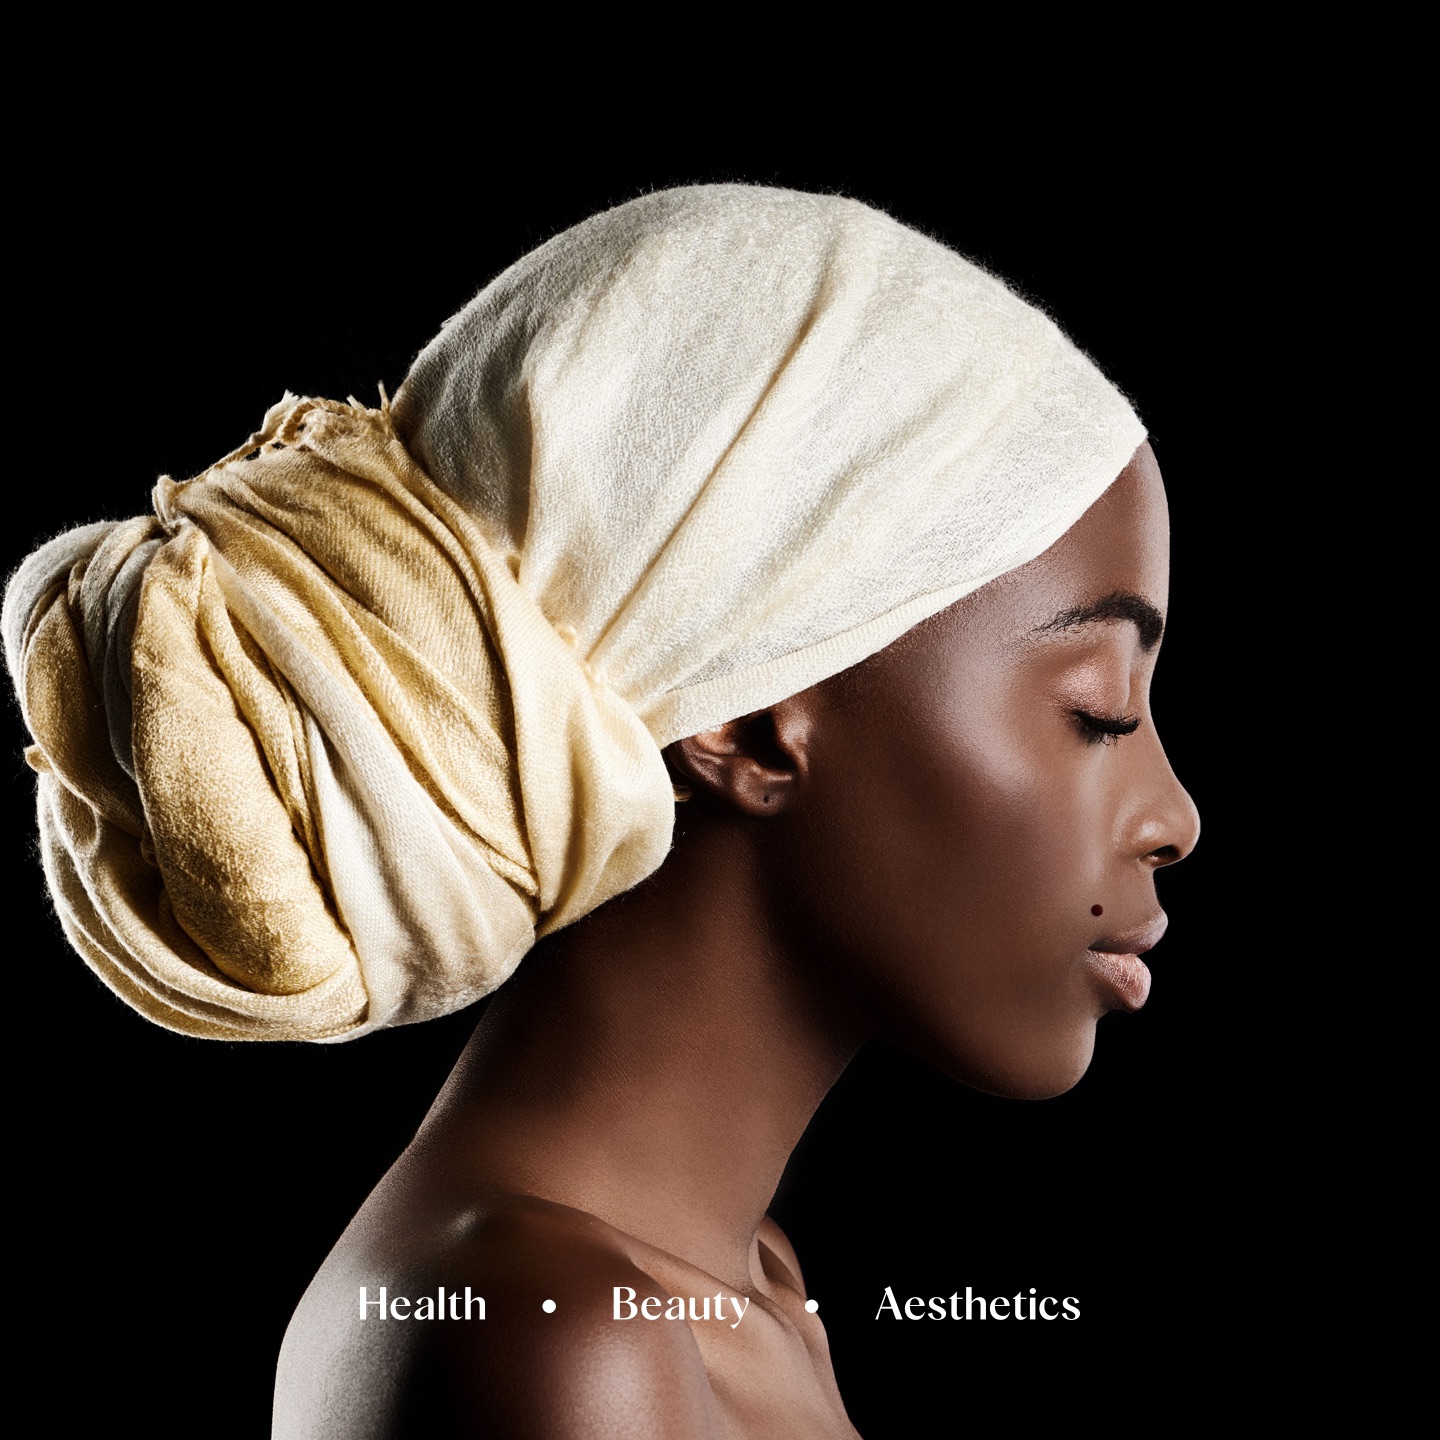 A keyvisuals of med and skin – Young black woman in profile view